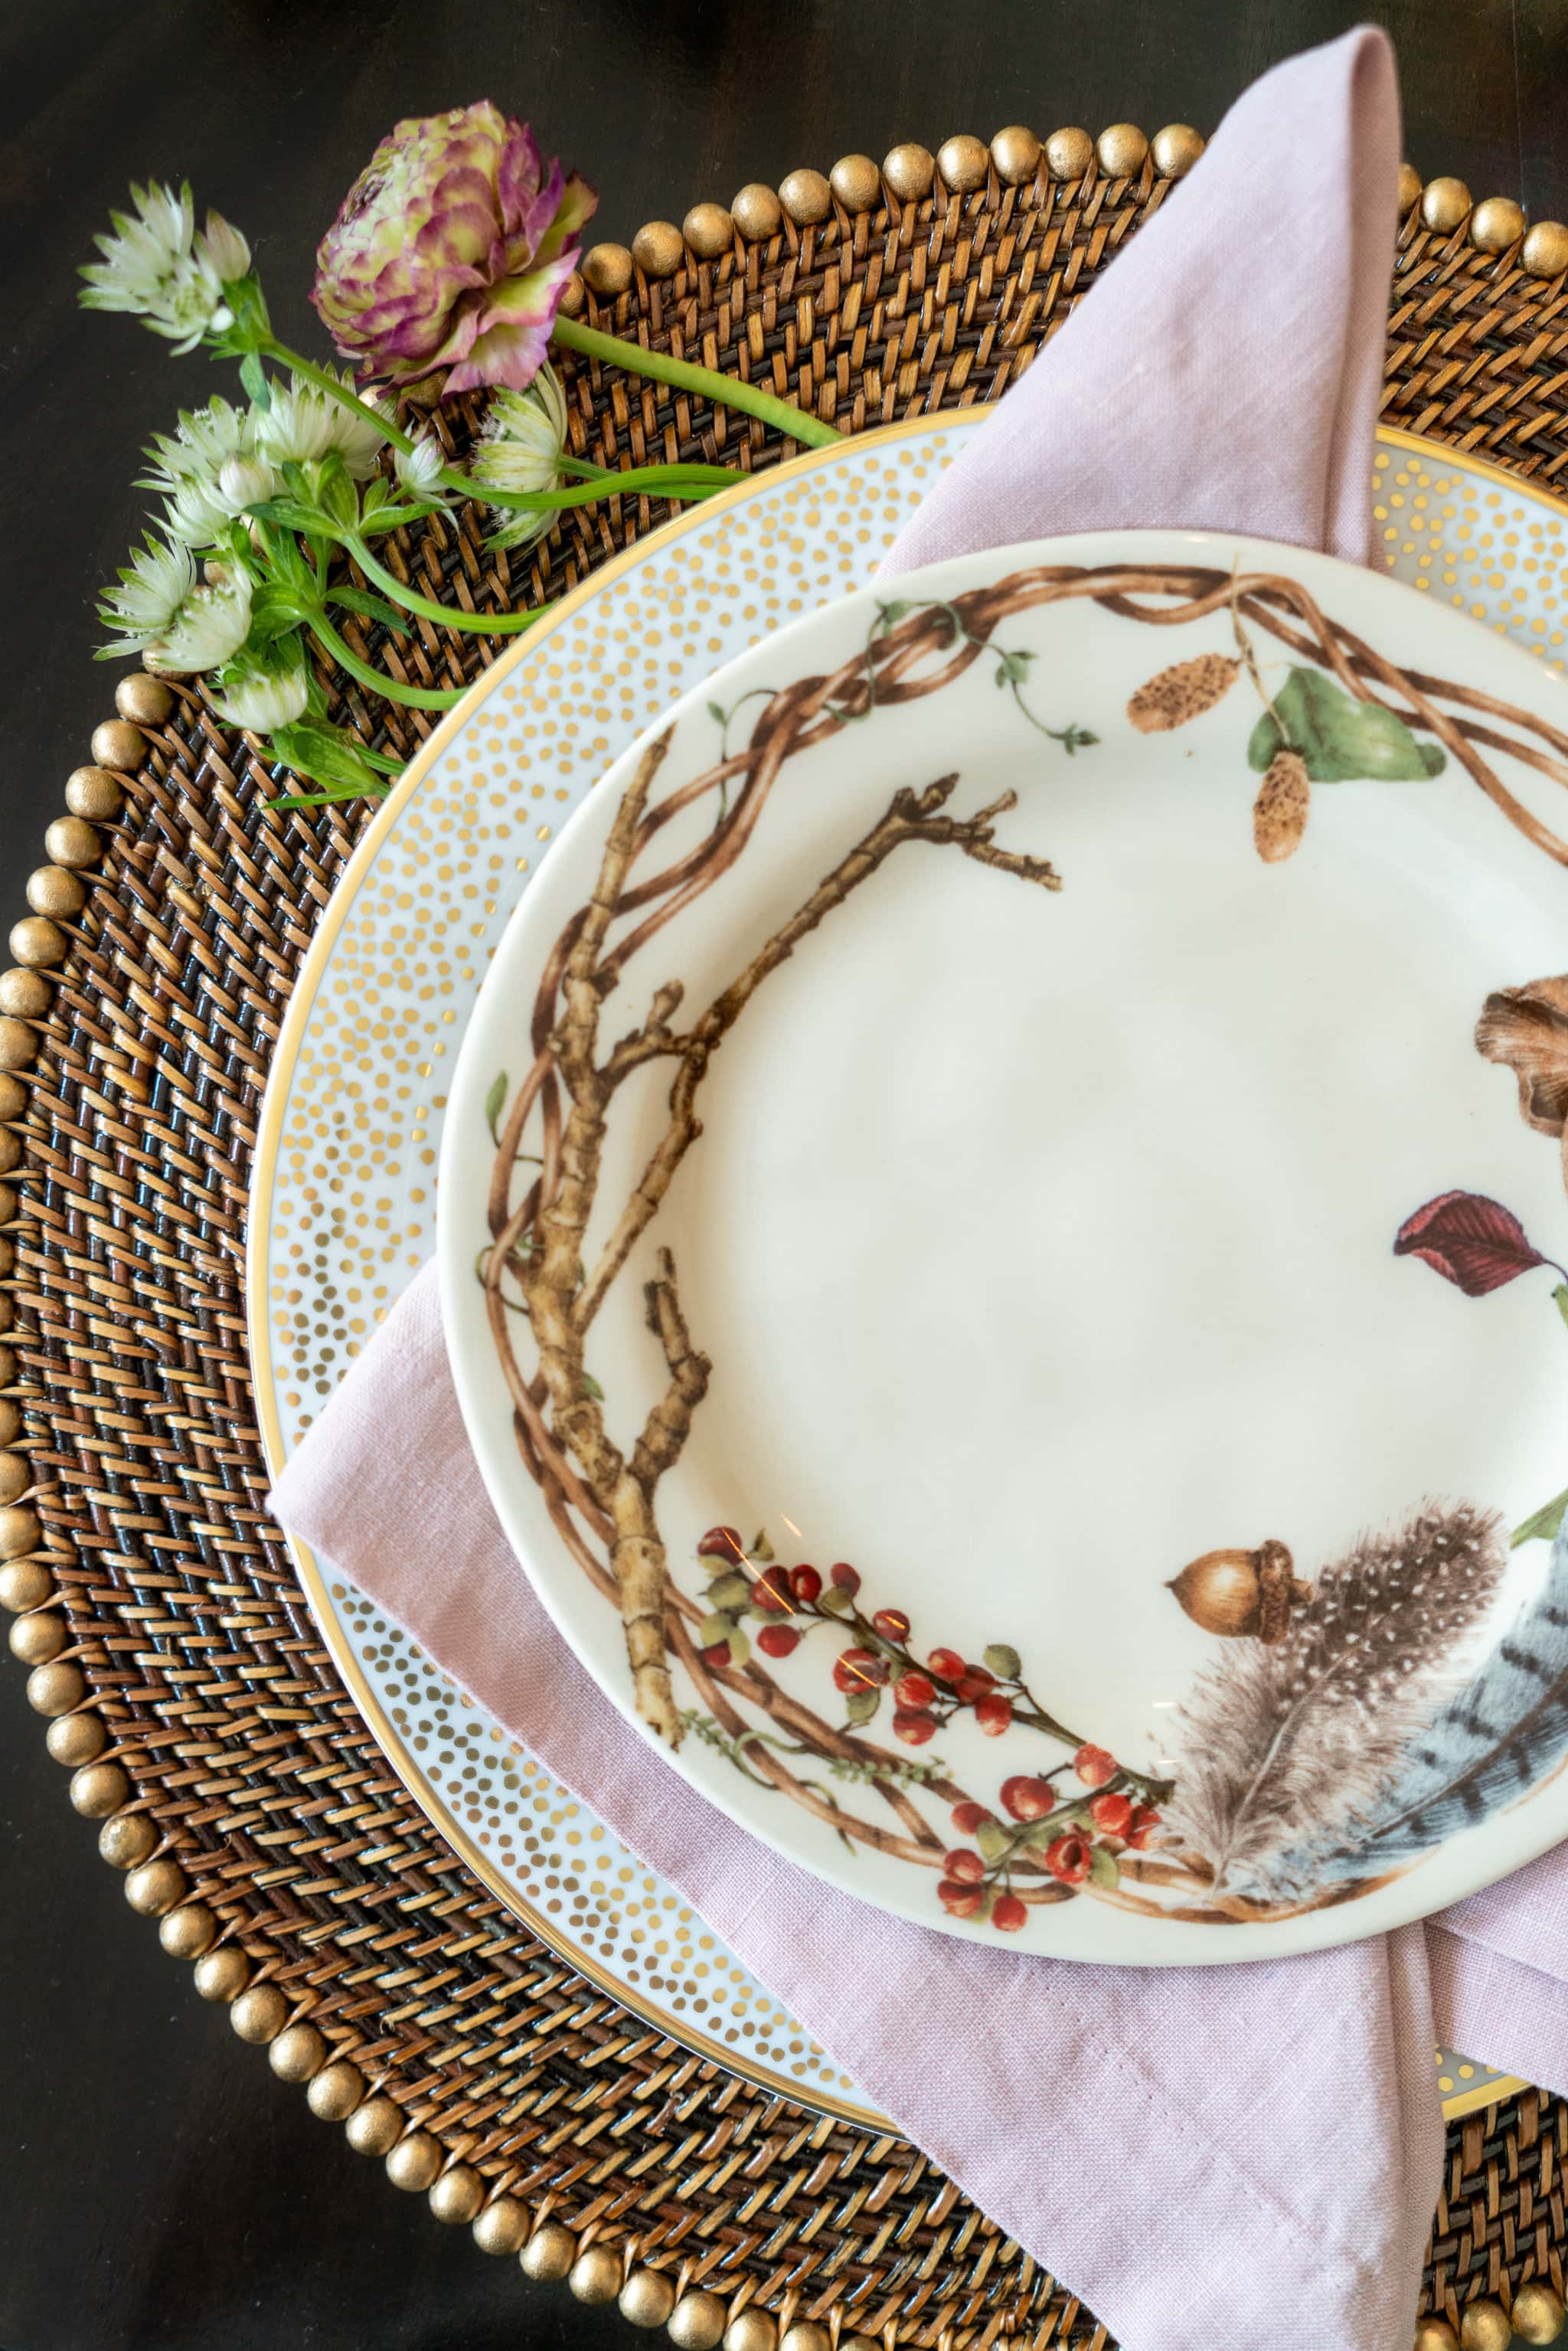 A table setting designed by Laura Umansky and photographed by Hannah Swiggard